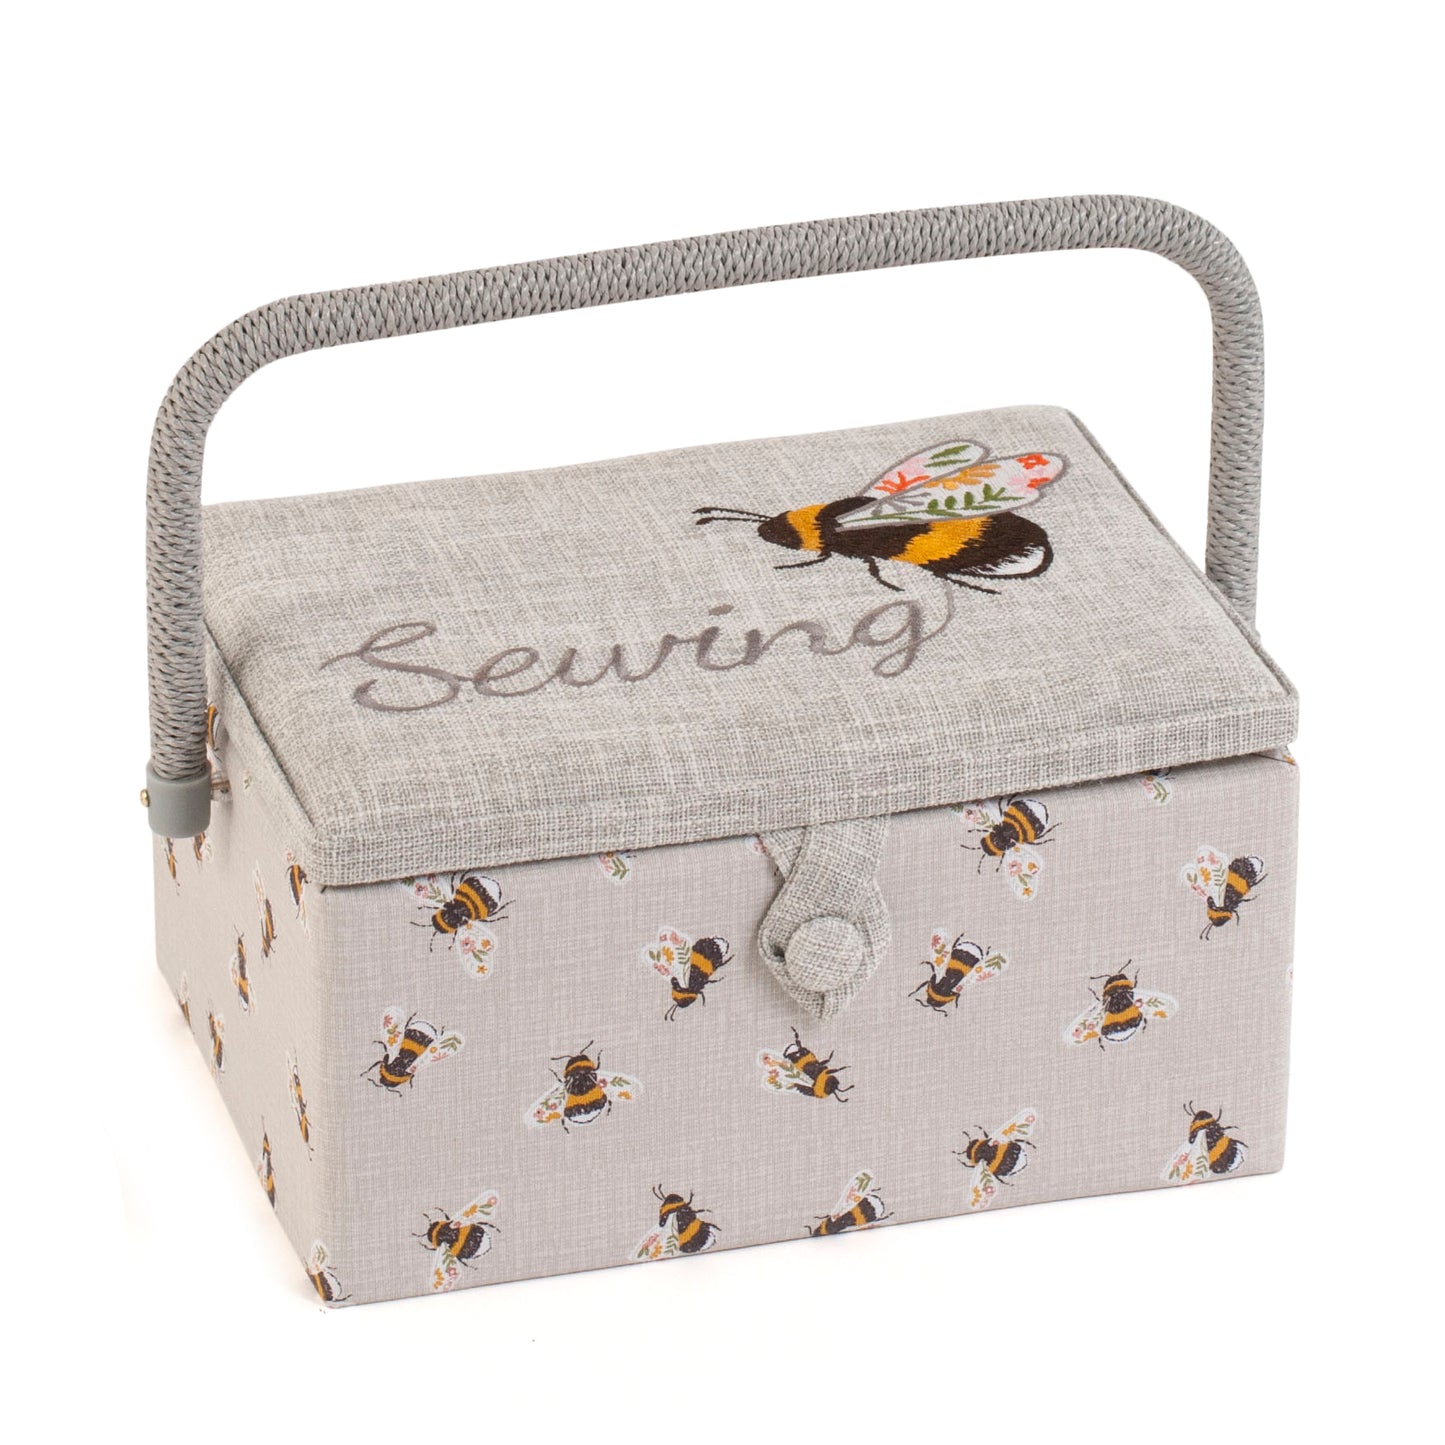 Hobby Gift Bees Embroidered Sewing Thread Storage Box